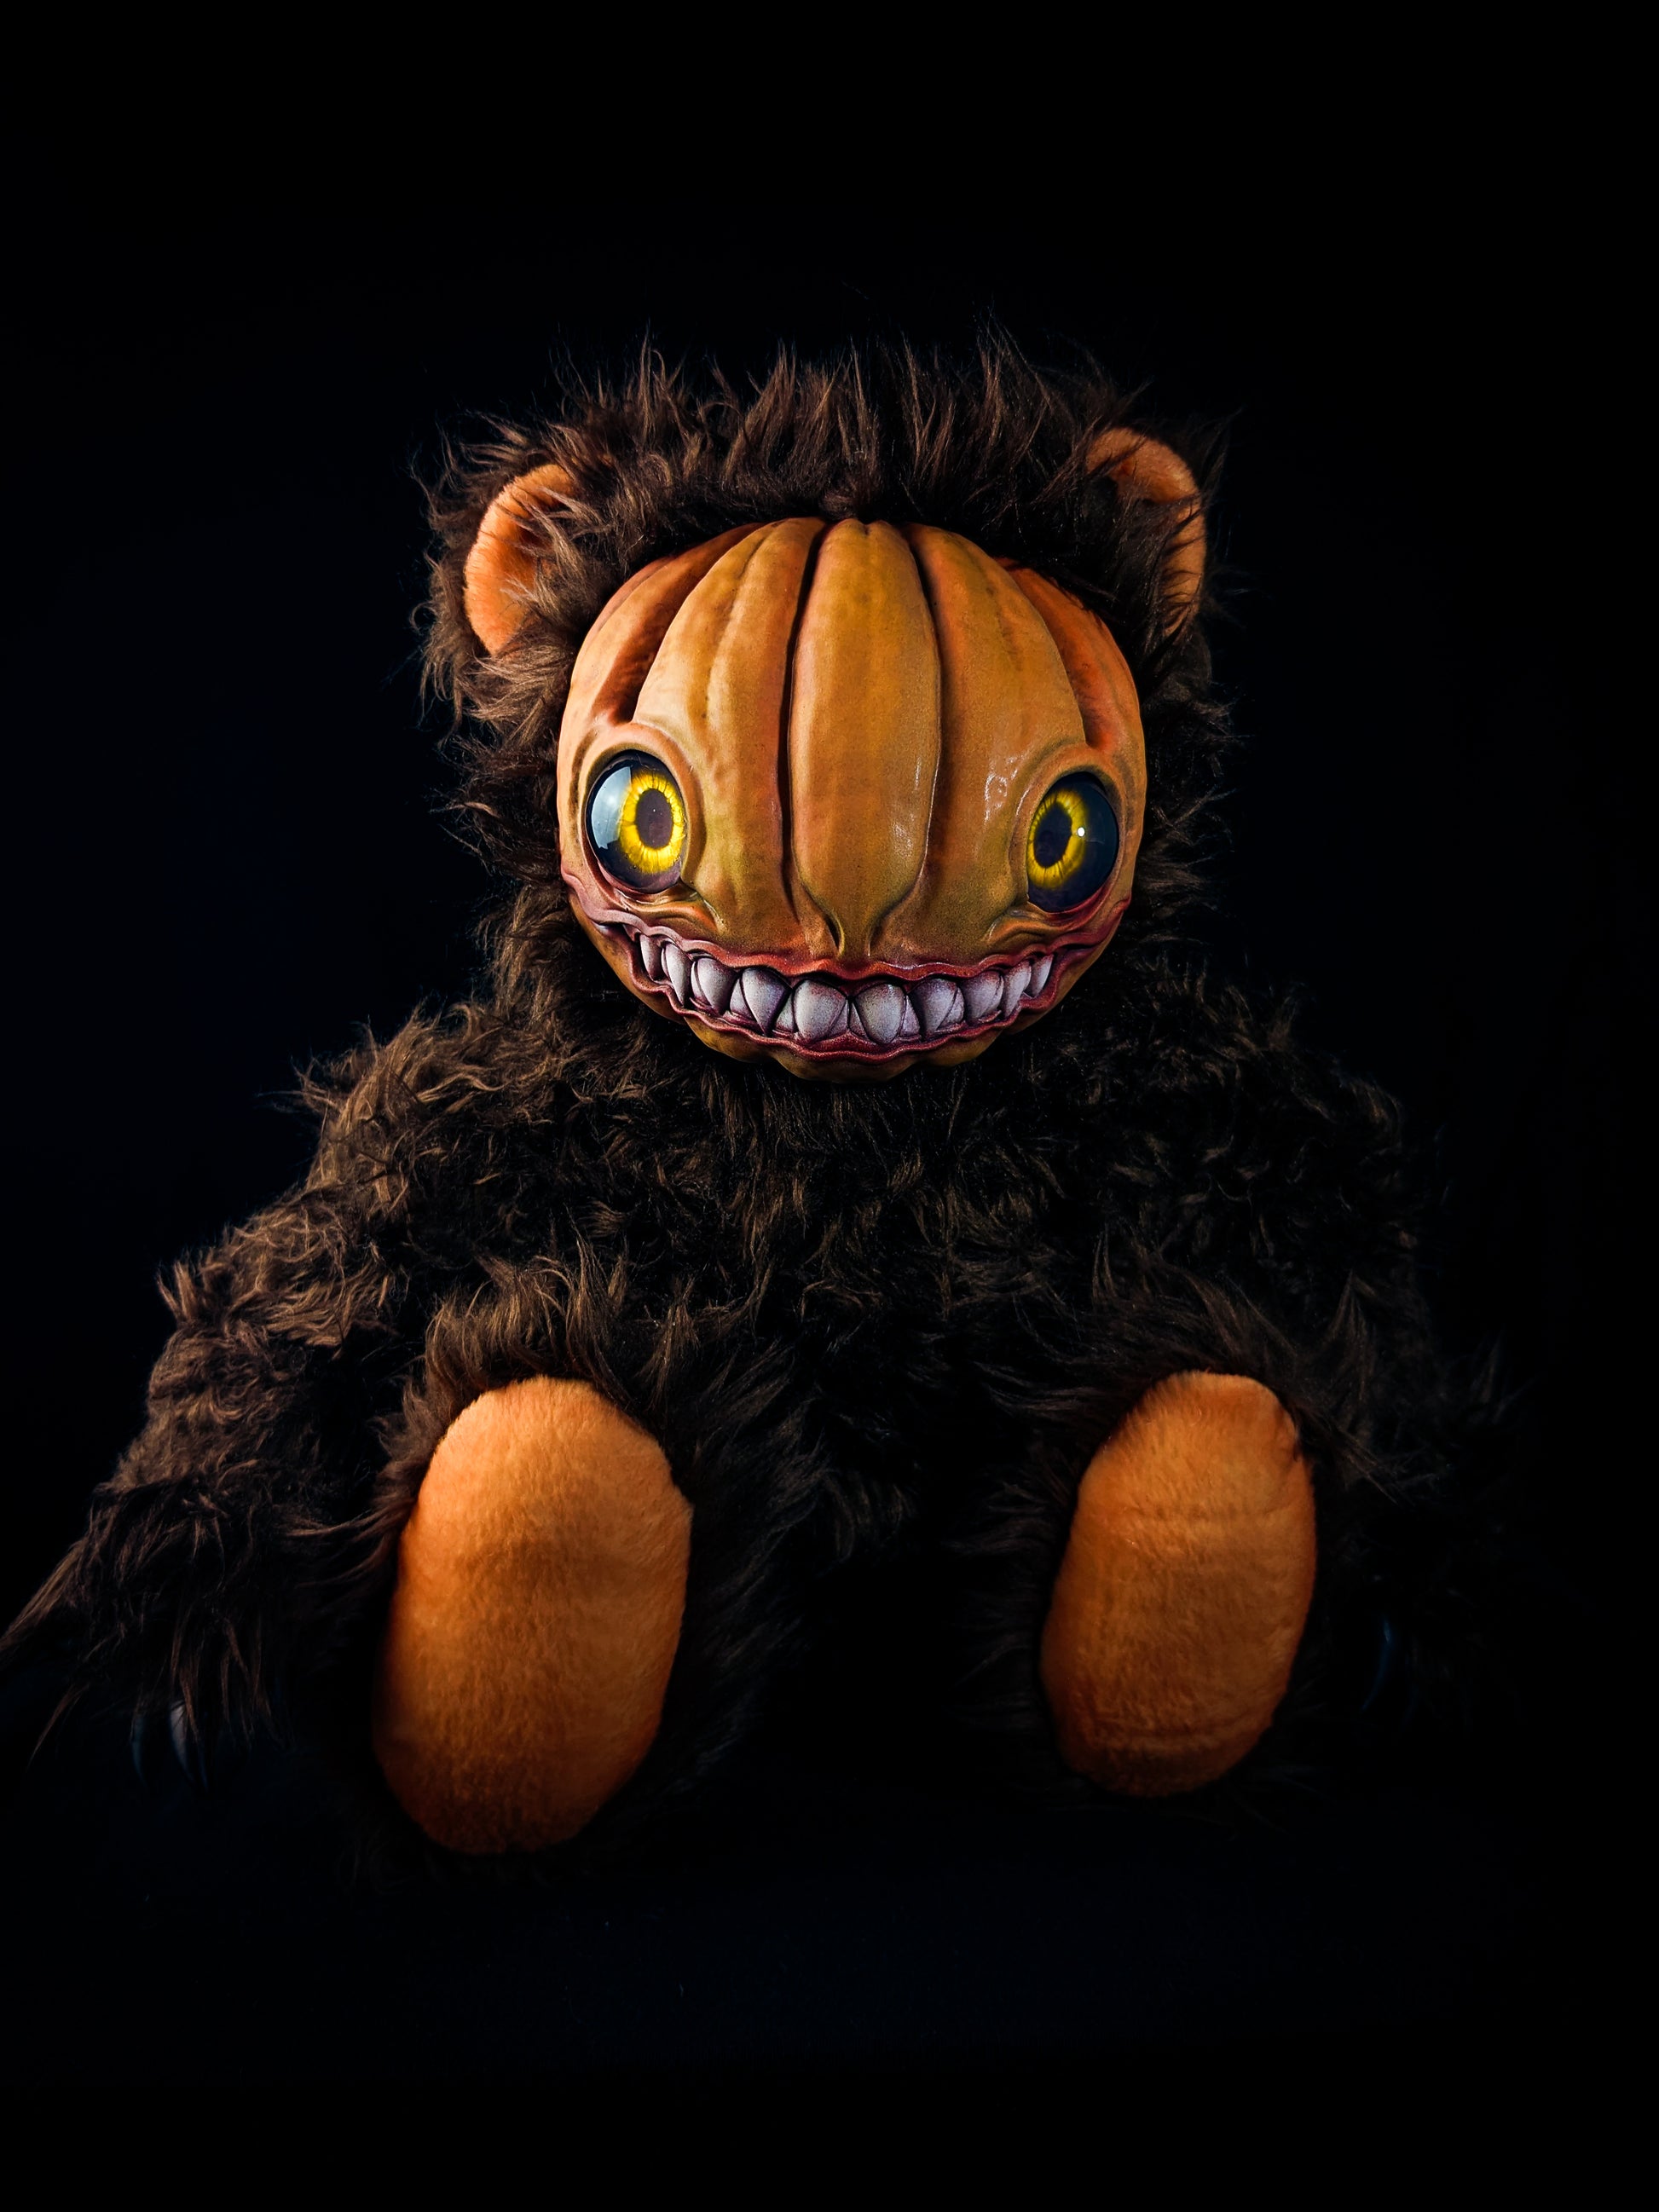 Pulp Masher: HAUNTVESTER - CRYPTCRITZ Handcrafted Creepy Cute Halloween Pumpkin Art Doll Plush Toy for Spooky Souls